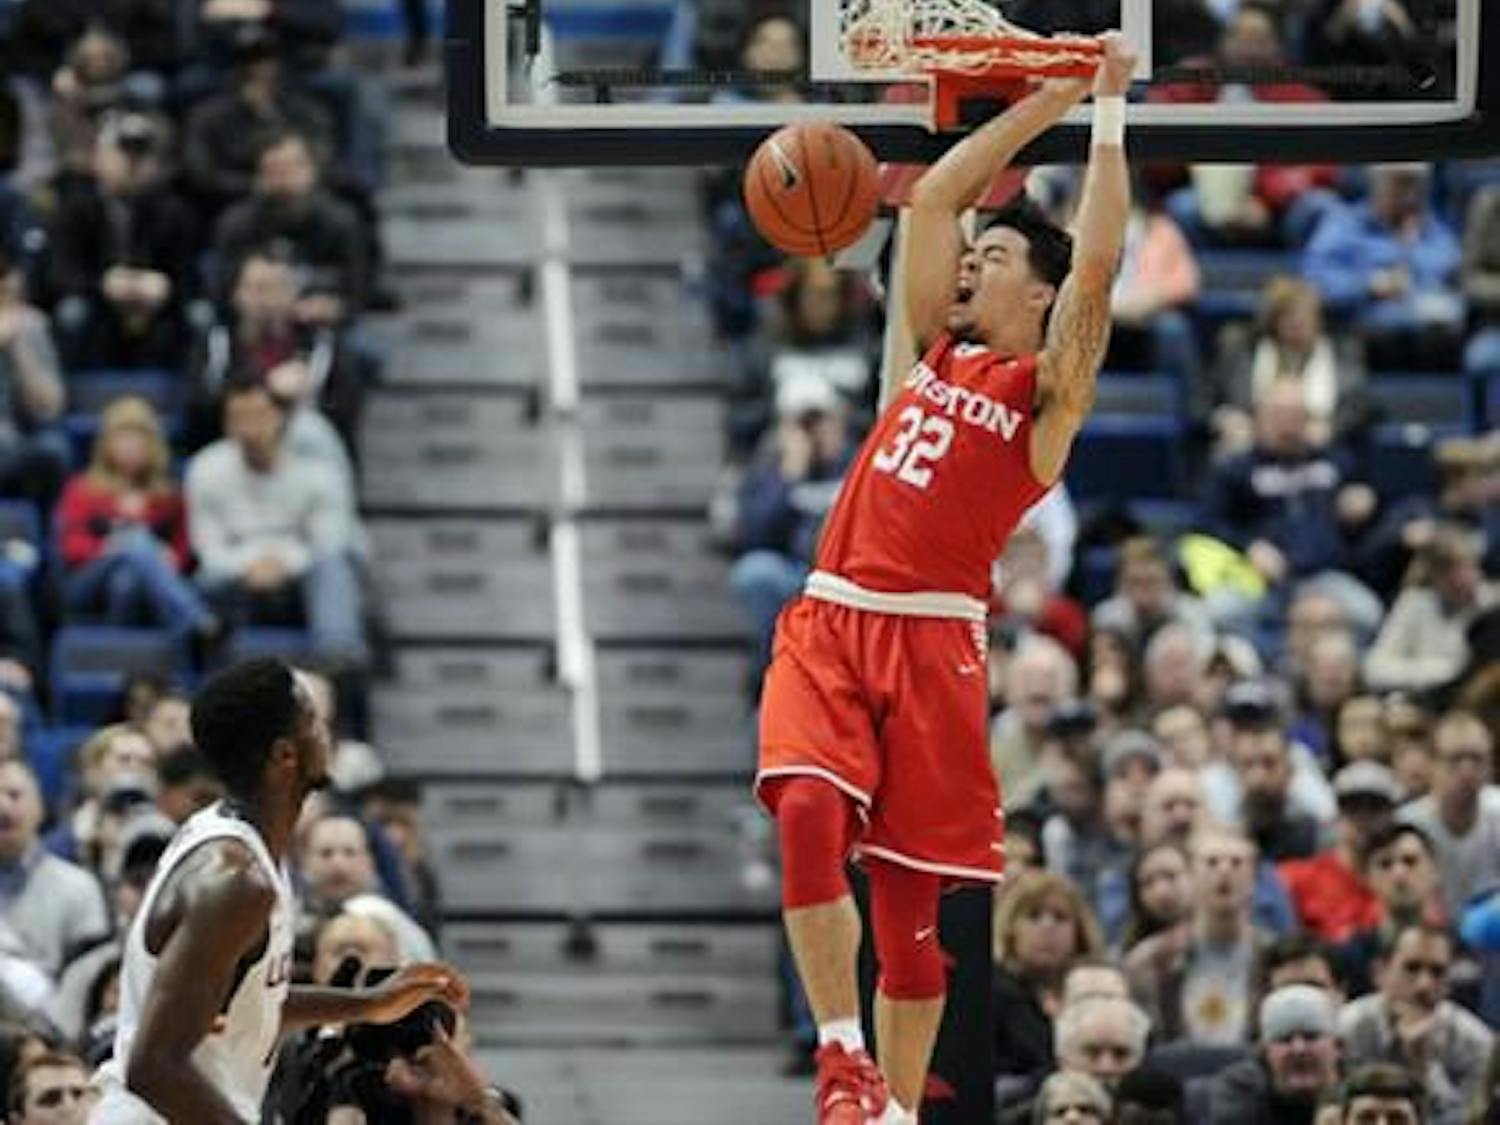 Houston's Rob Gray reacts while dunking the ball as Connecticut's Kentan Facey, left, looks on, in the first half of an NCAA college basketball game, Wednesday, Dec. 28, 2016, in Hartford, Conn. (AP Photo/Jessica Hill)